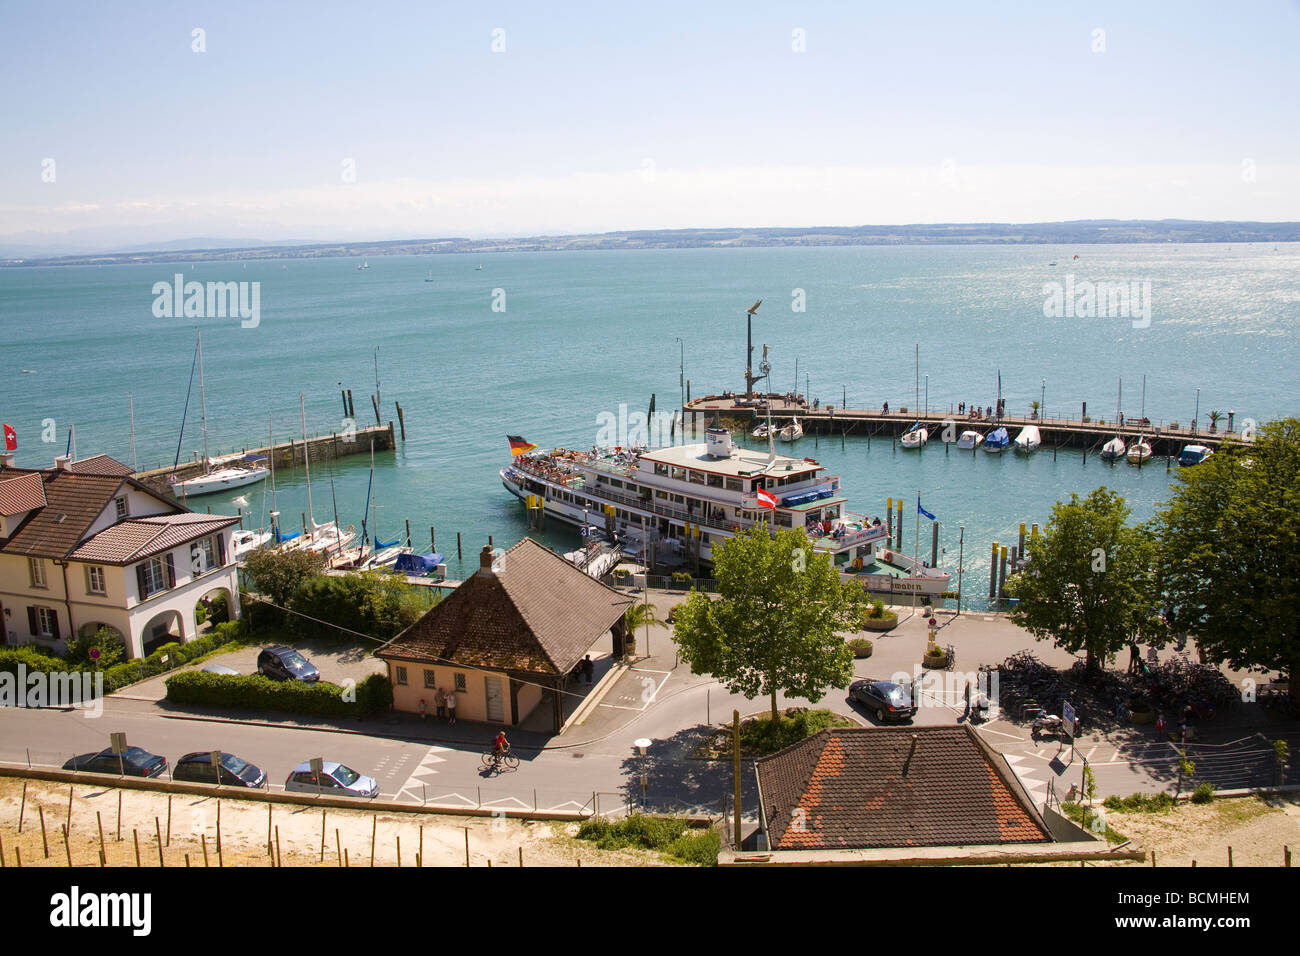 Meersburg Baden Wurttemberg Germany EU View down to the harbour on Lake Constance Stock Photo